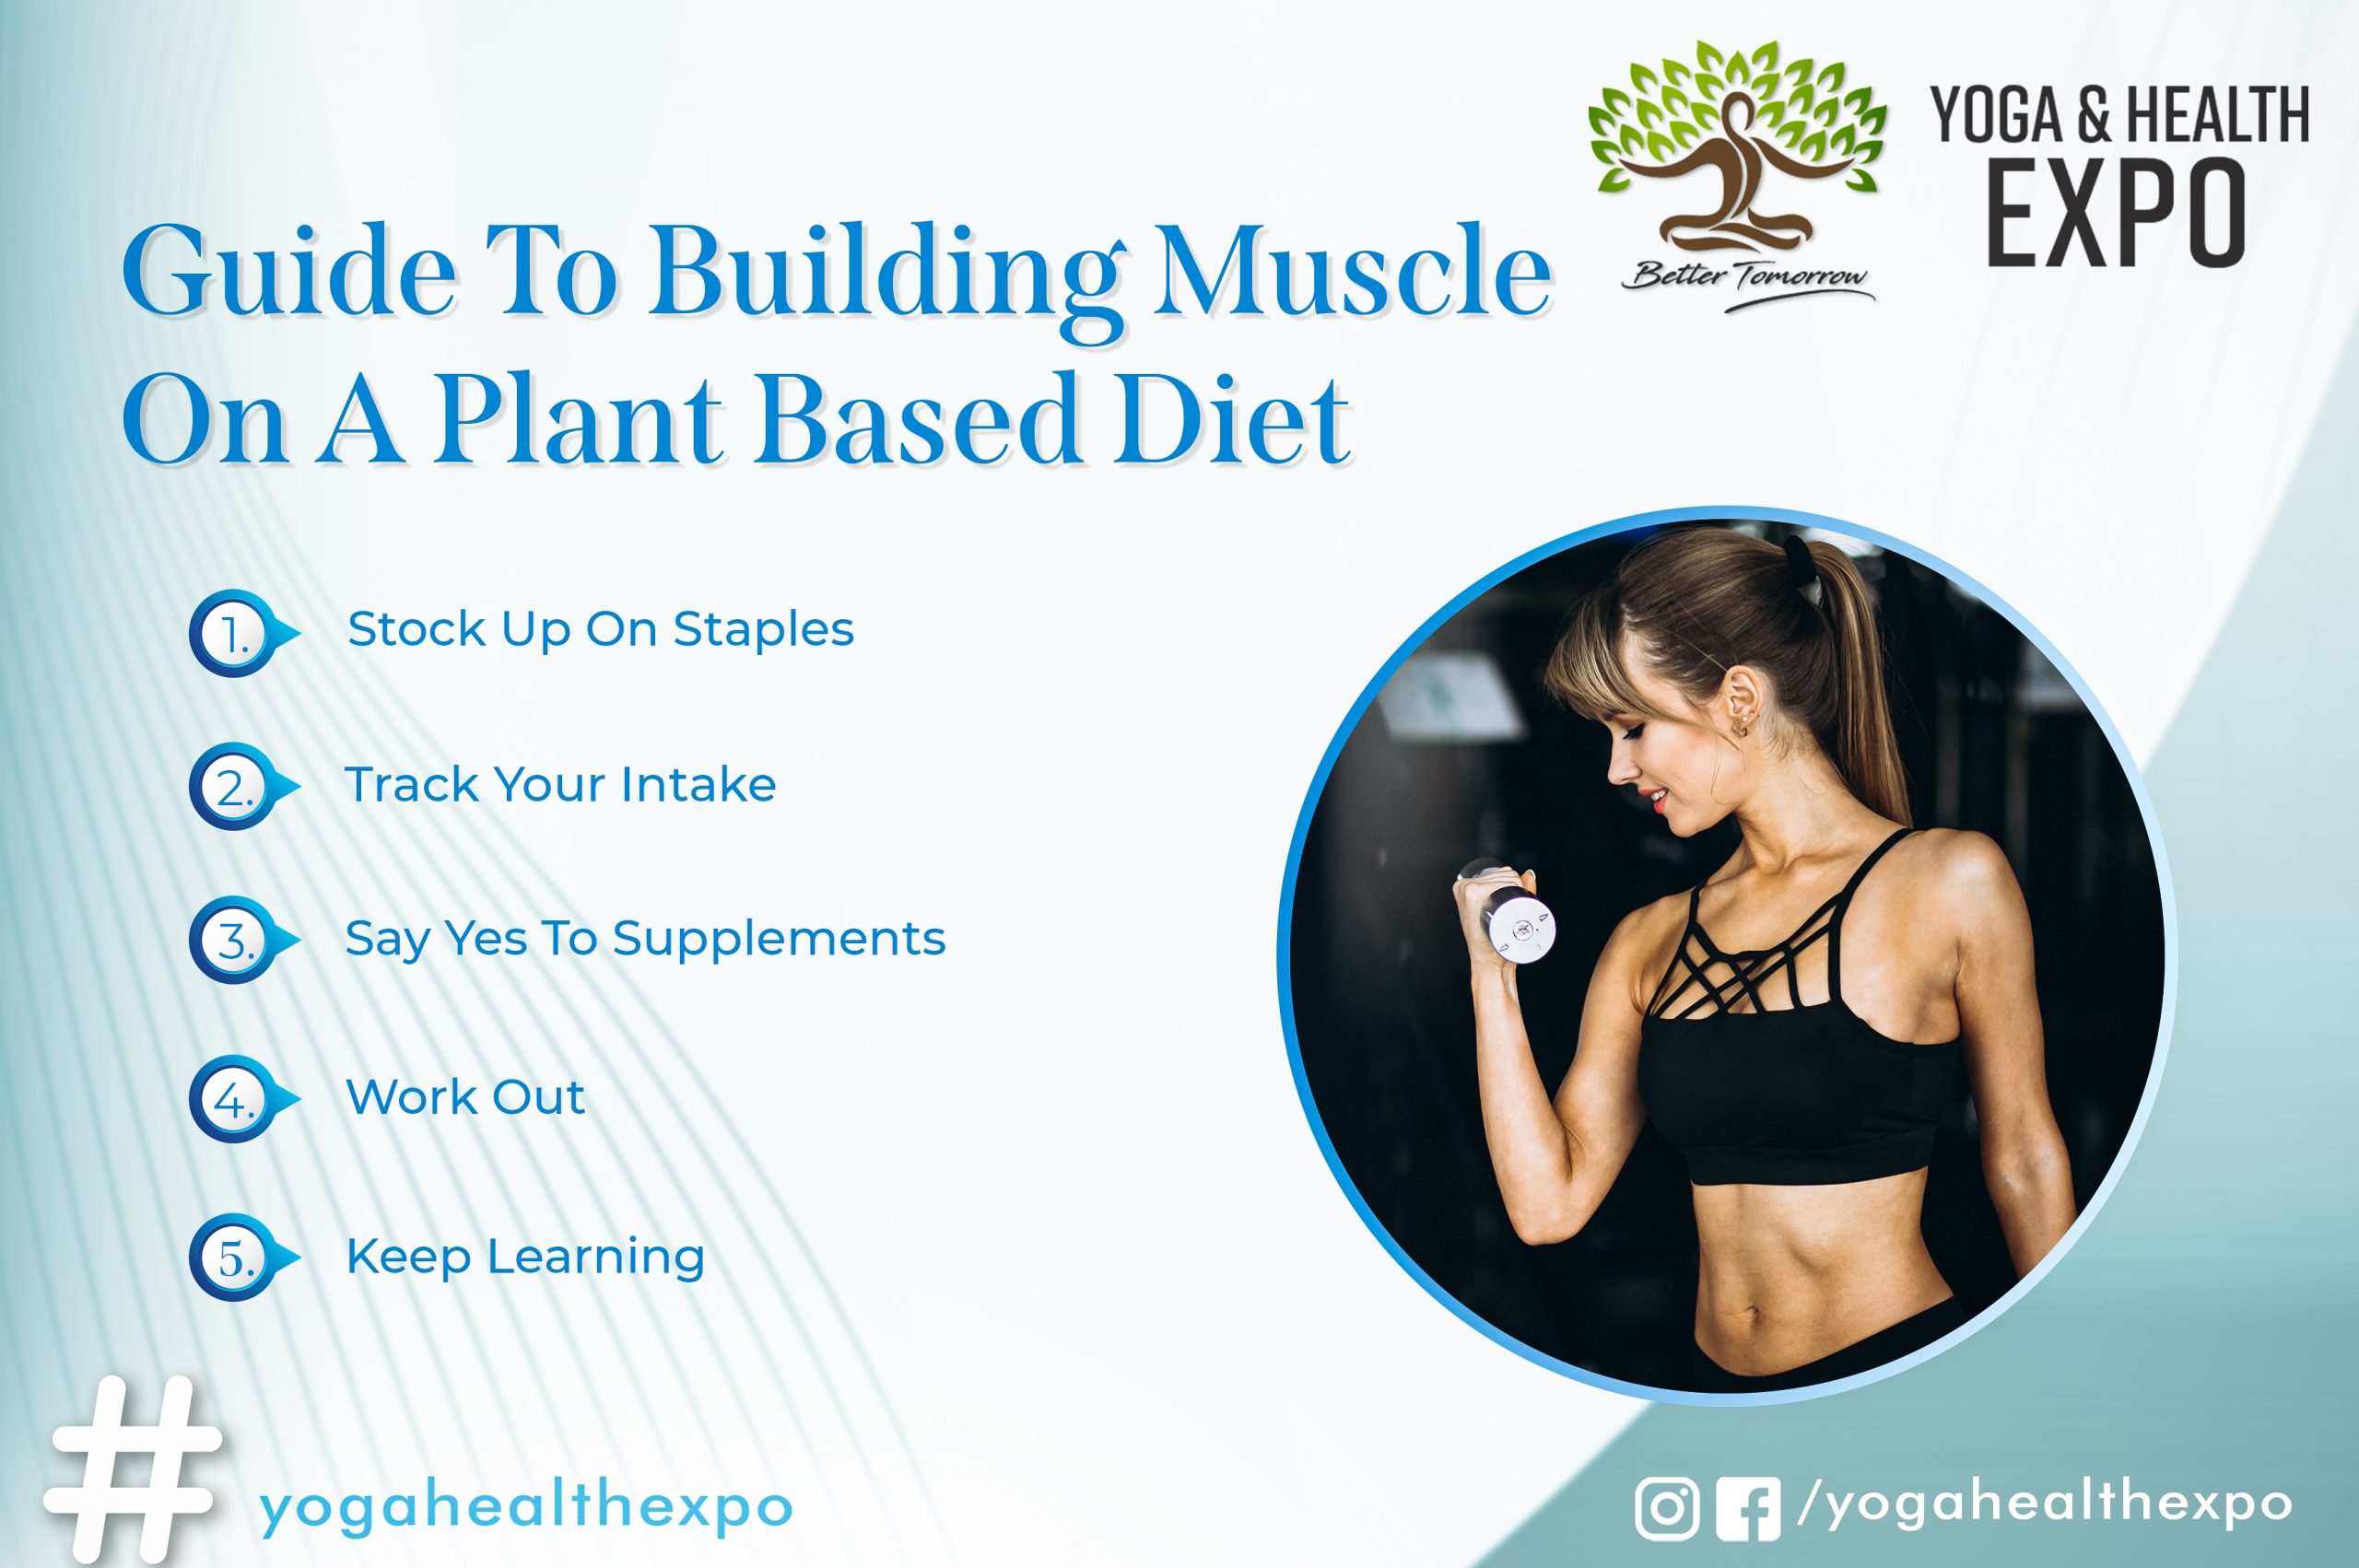 Guide To Building Muscle On A Plant-Based Diet